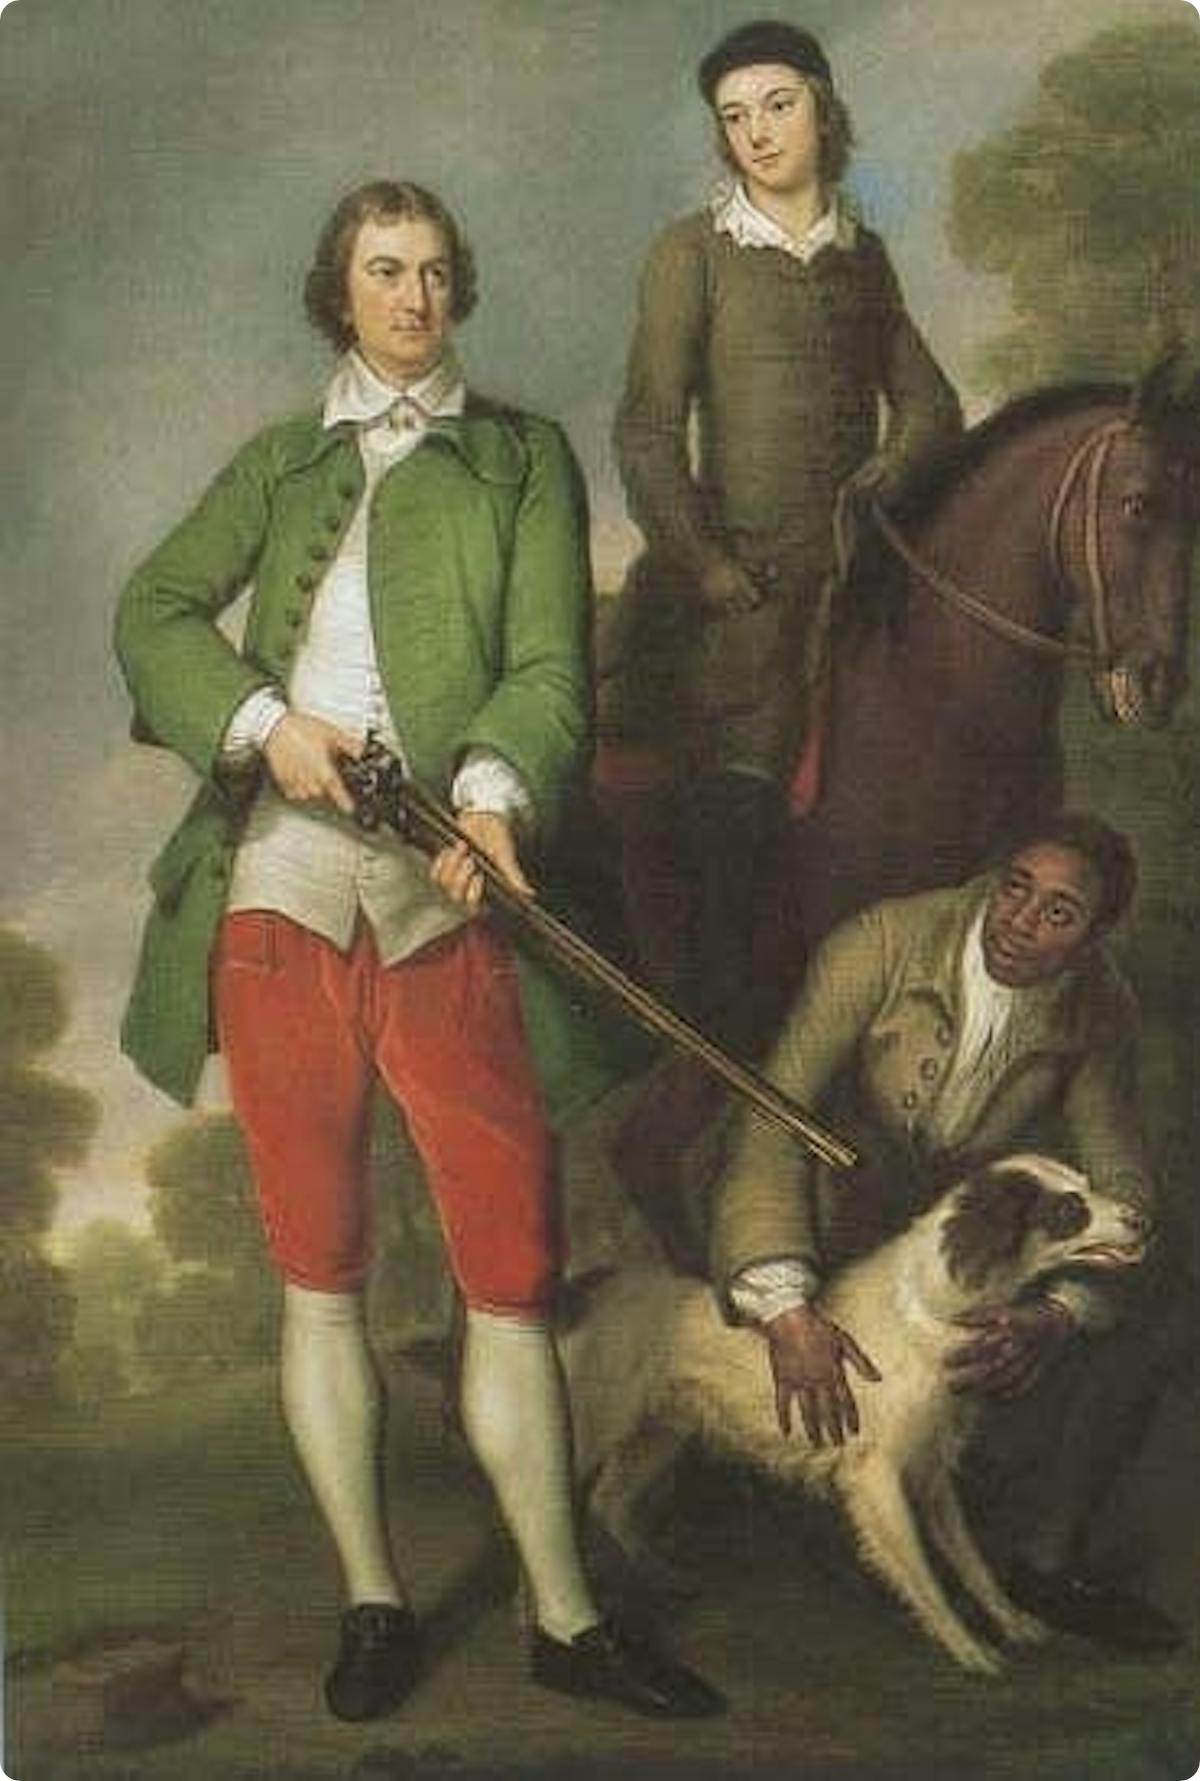 The First Earl Spencer hunting with his son and a servant